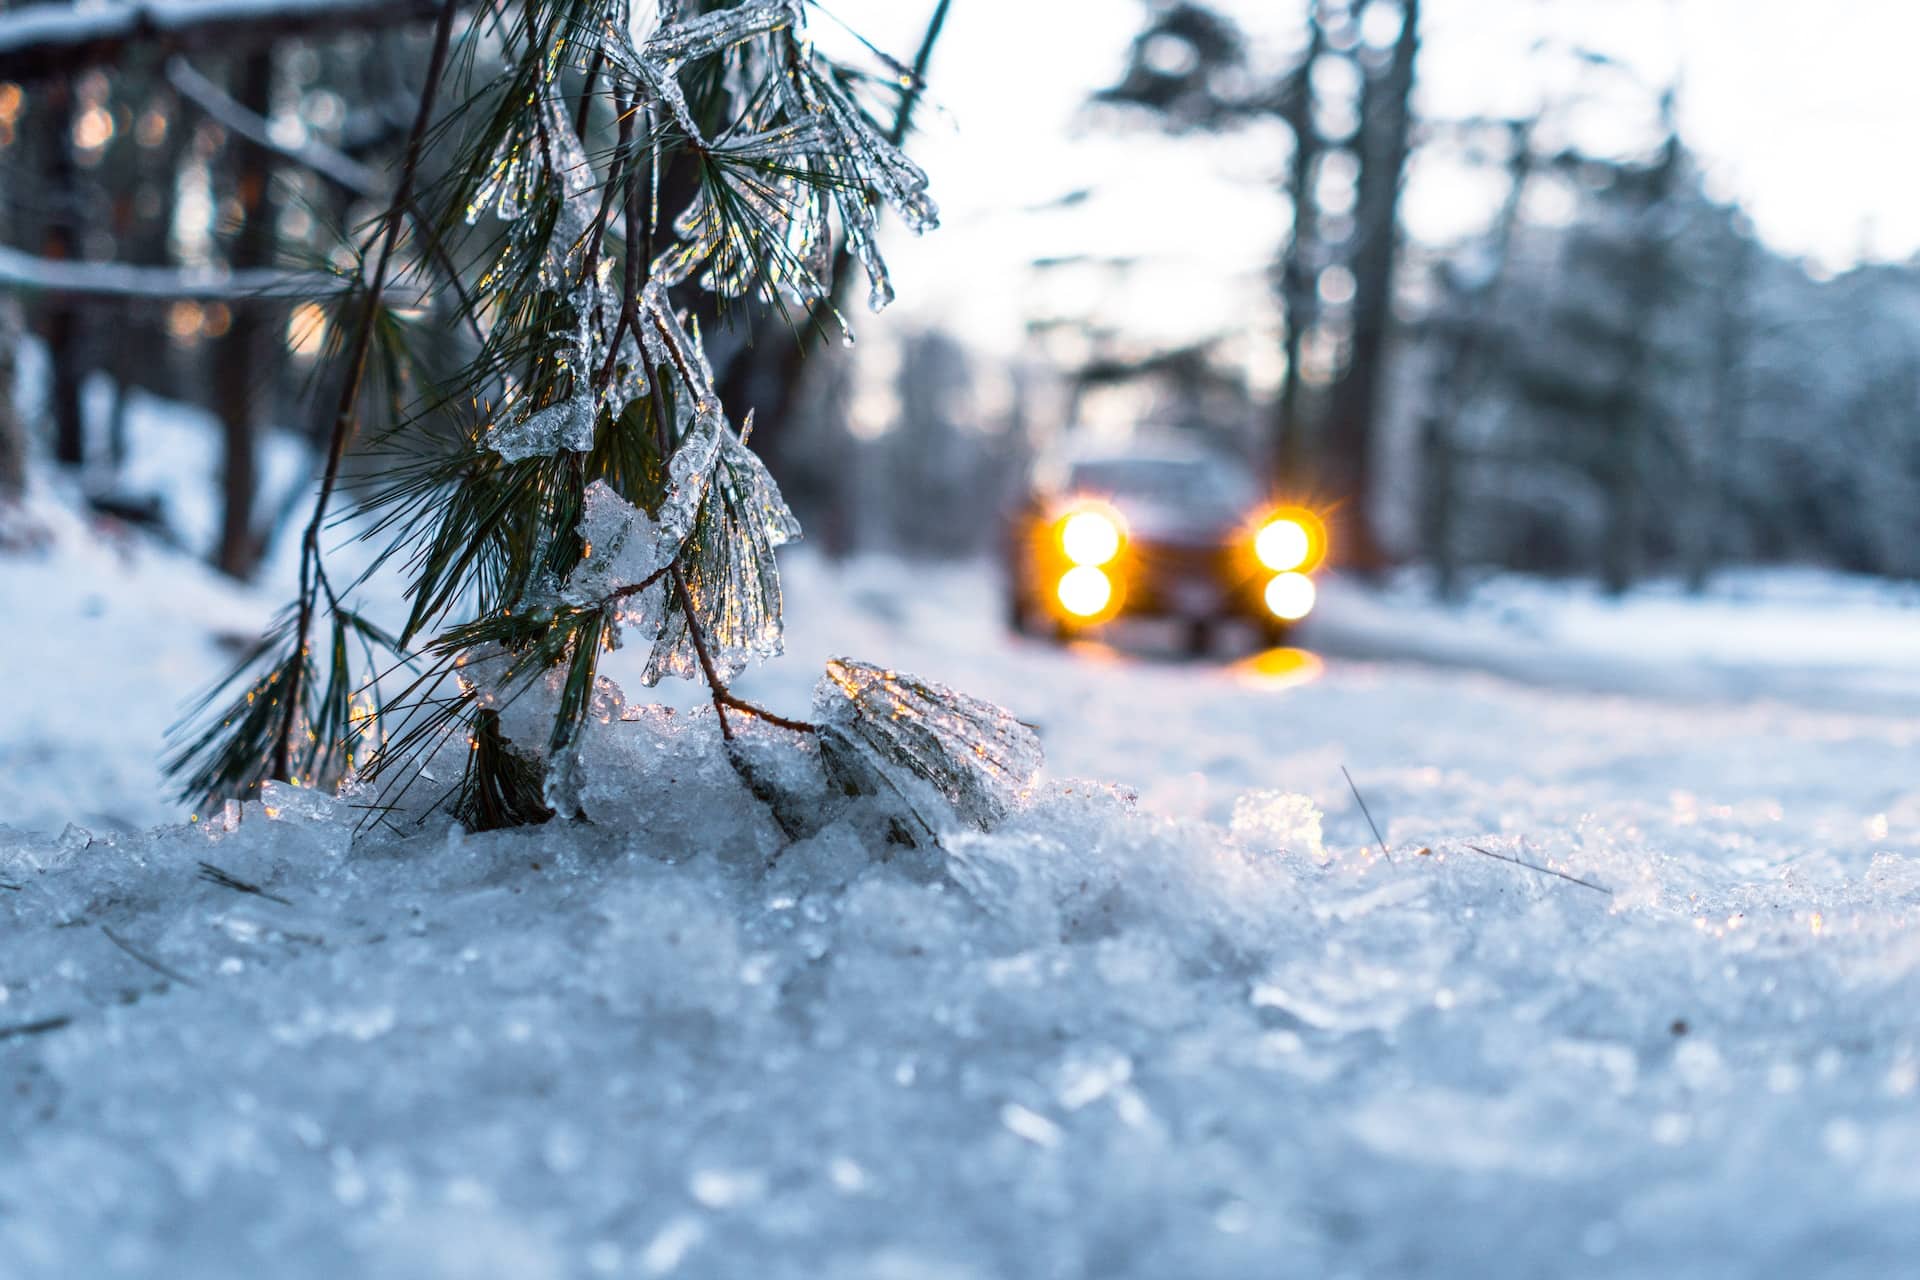 frozen pine needles captured while a car with headlights are visible in the distance